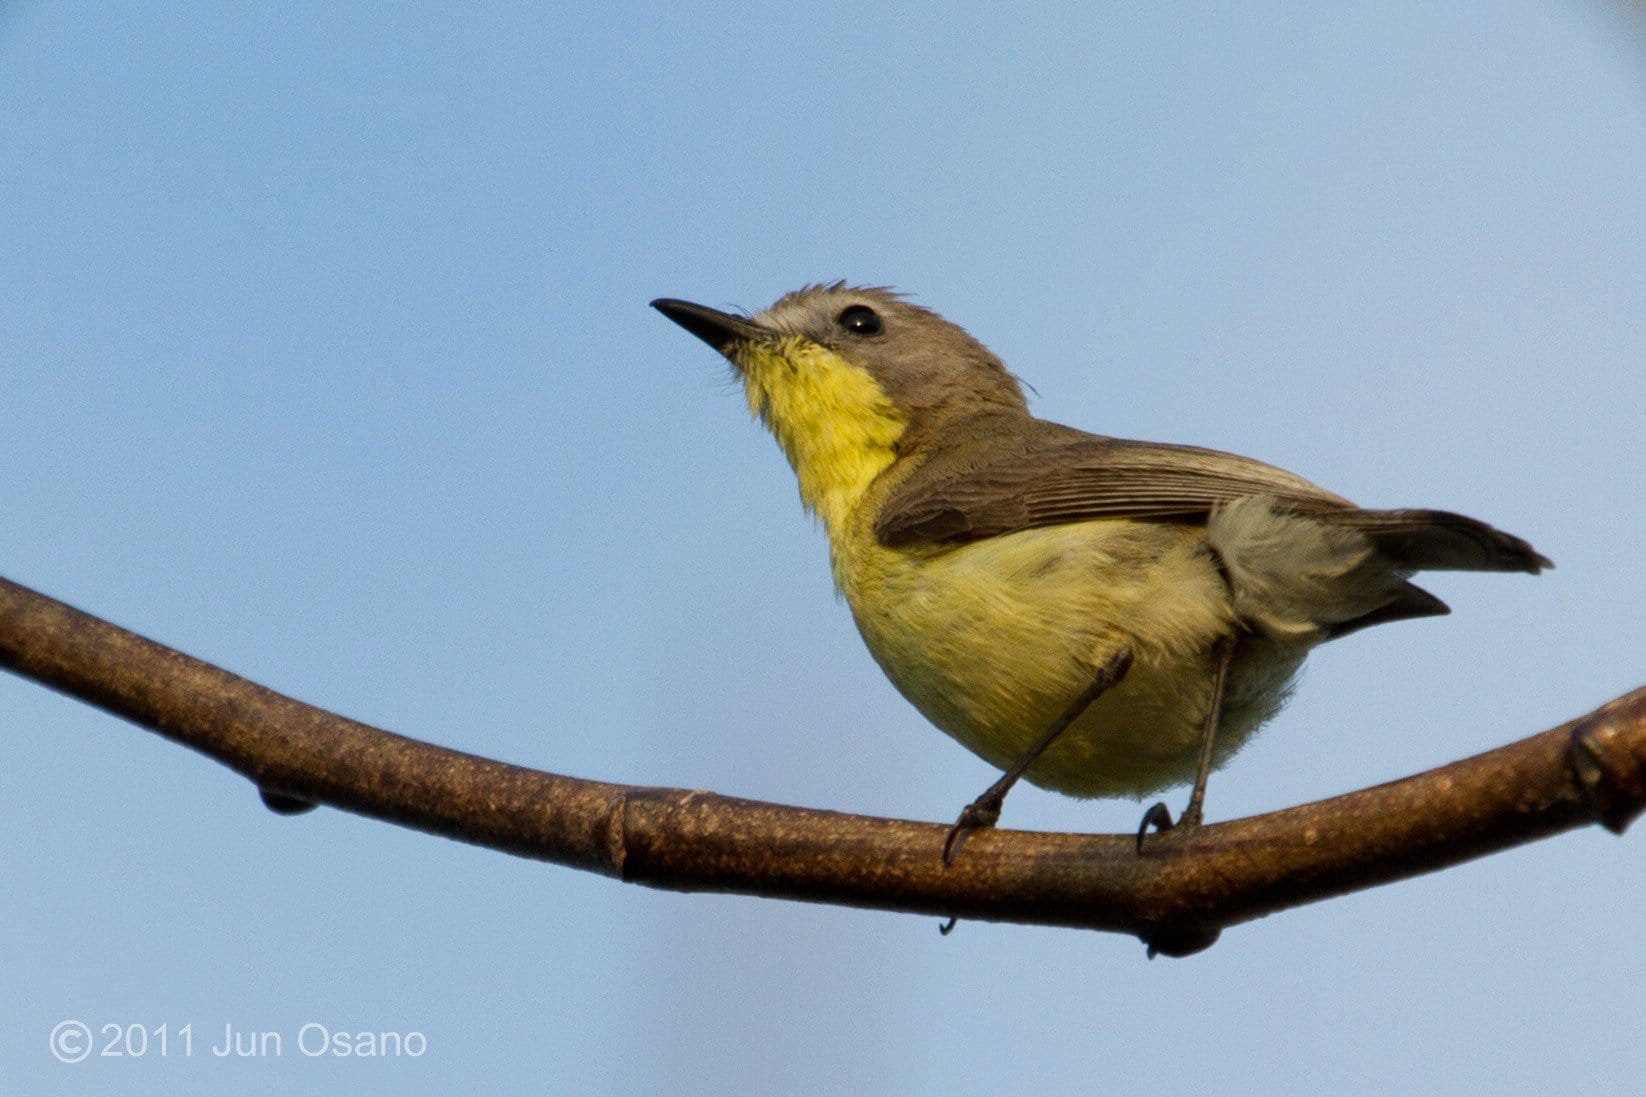 The tiny Golden-bellied Flyeater is more often heard. Photo by Jun Osano.